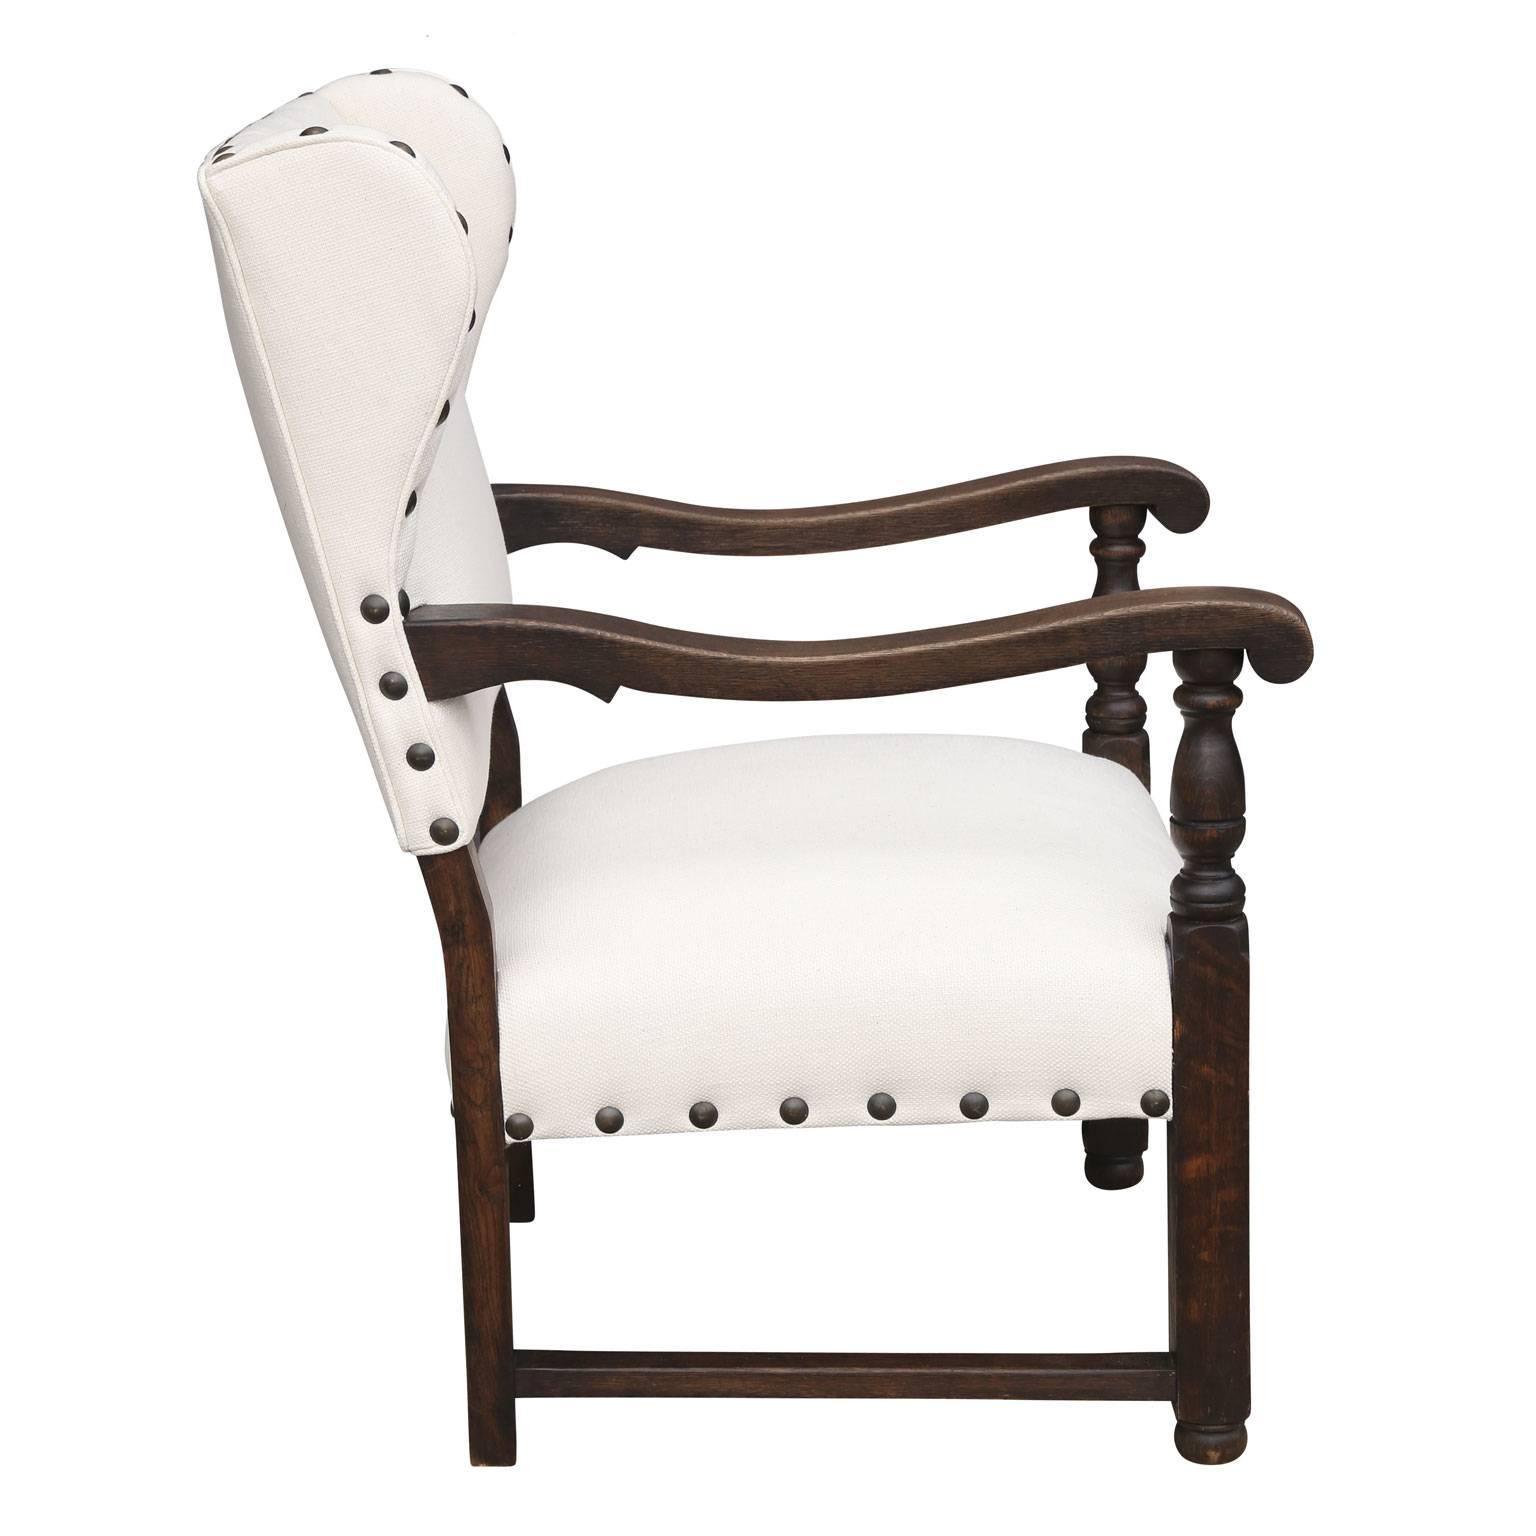 Early 19th century wingback chair from France, circa 1830-1850. This deep-seated wing chair's unusual proportions are the result of the original back shortened at a later, but early date, with ears (cheeks) subsequently added. This fireside chair is